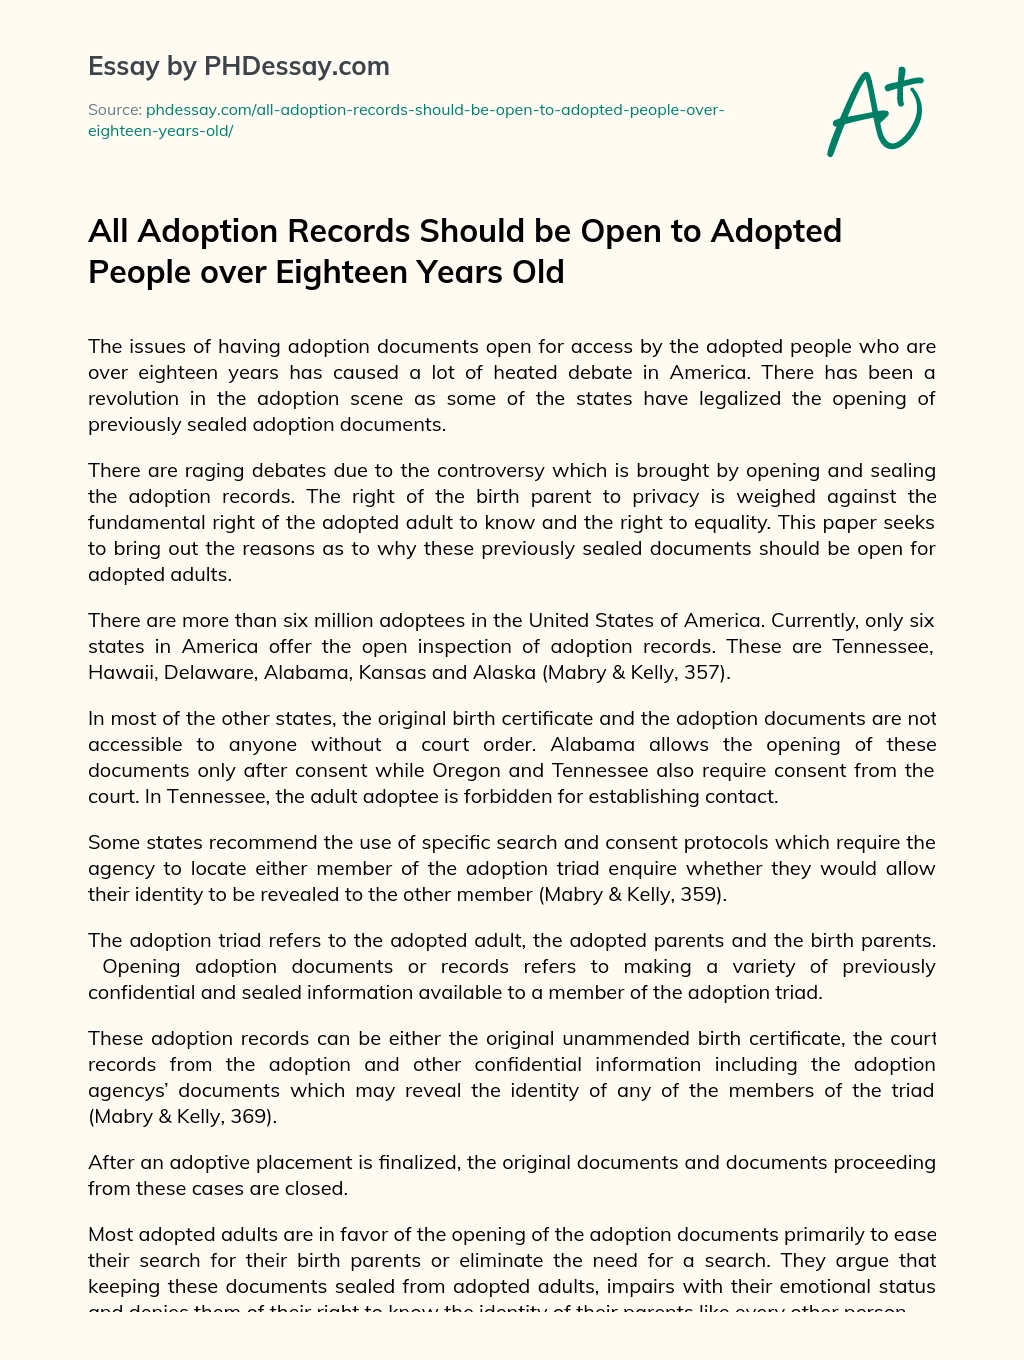 All Adoption Records Should be Open to Adopted People over Eighteen Years Old essay